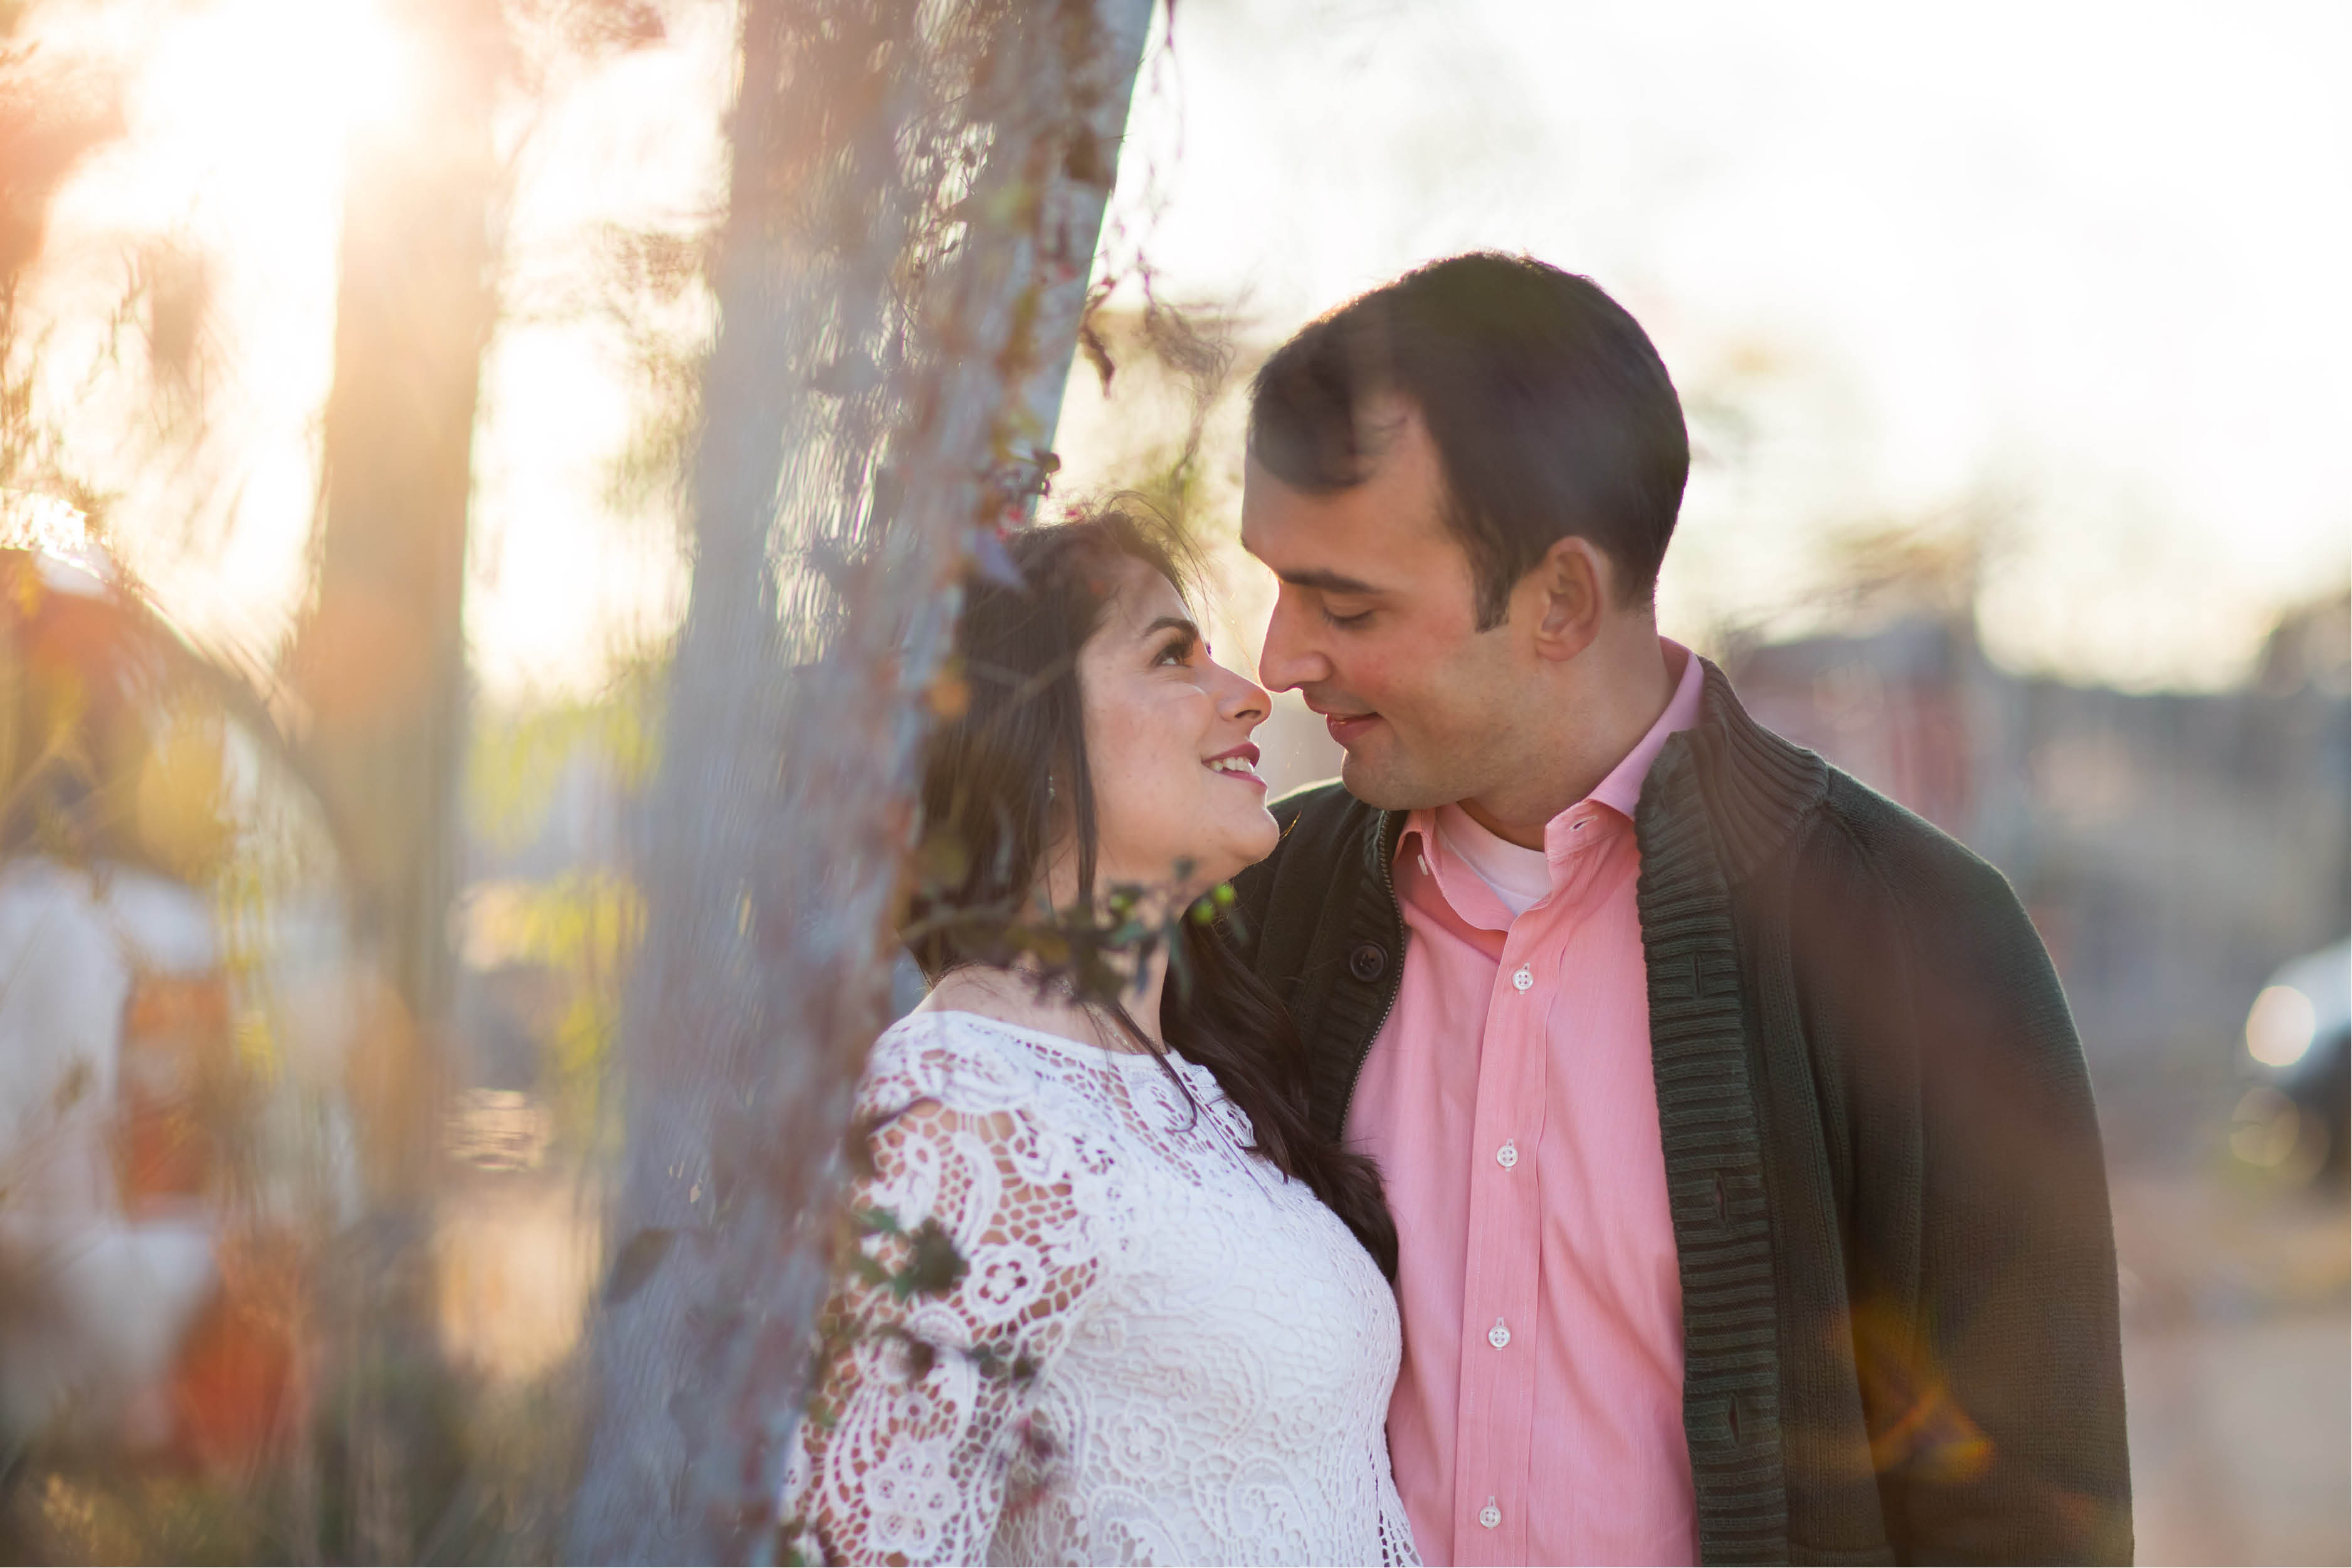 Emma_cleary_photography Dumbo Engagement shoot9